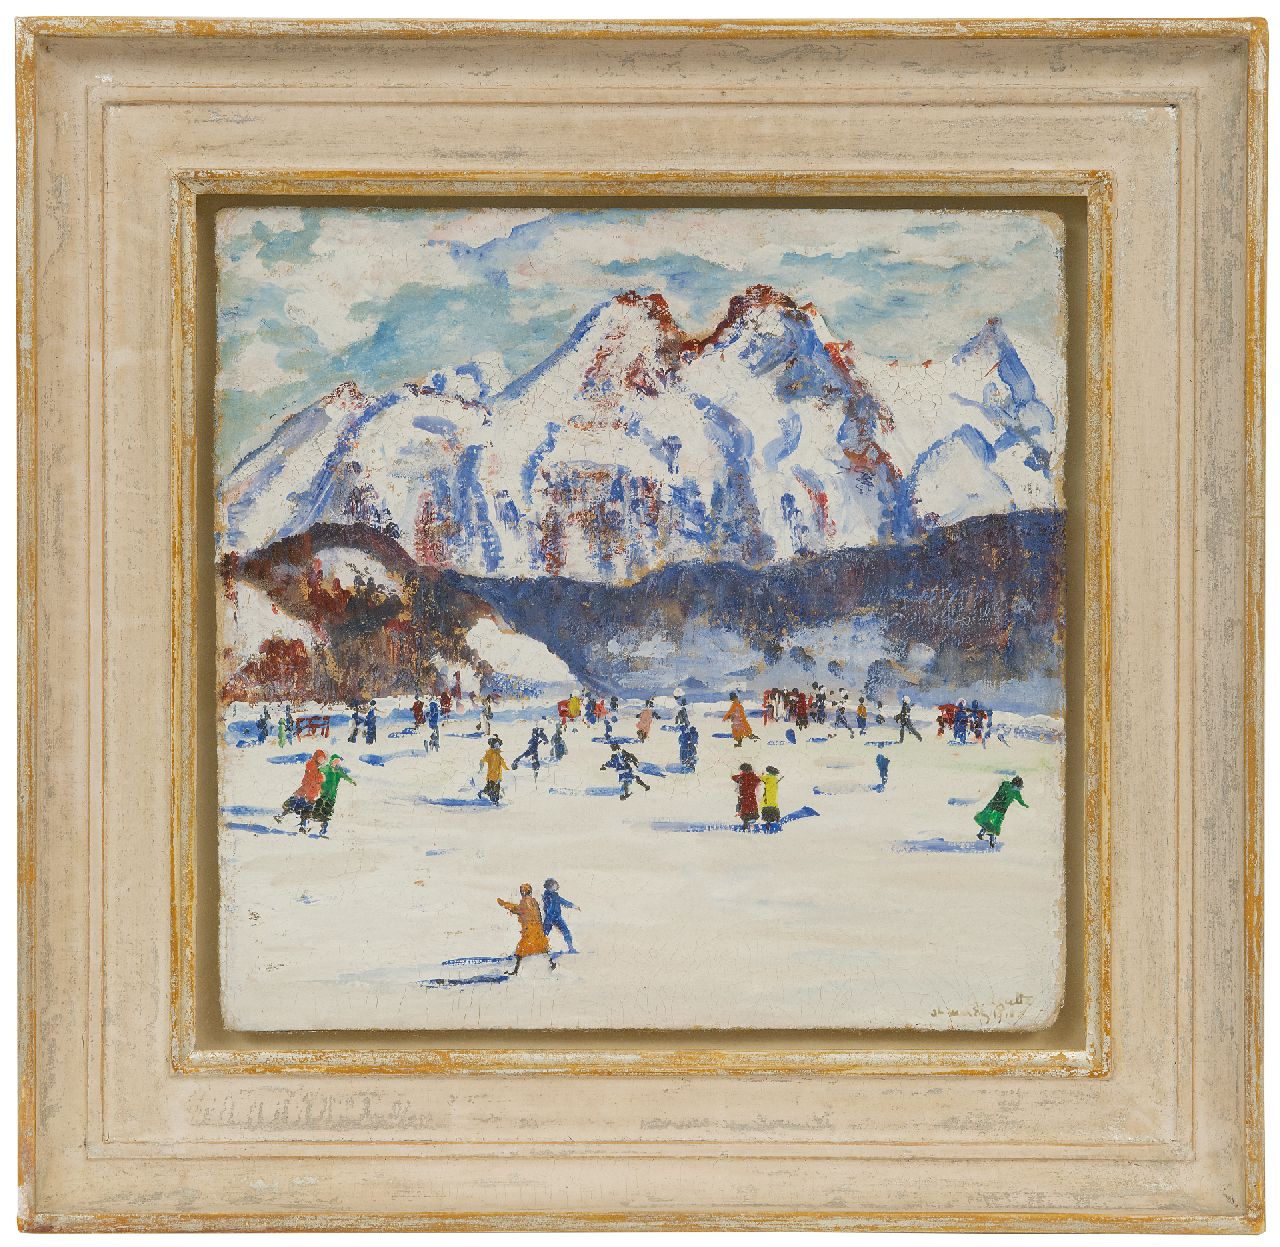 Agutte G.  | Georgette Agutte, Skating at St. Moritz, gouache on board 23.5 x 24.3 cm, signed l.r. and dated 'St. Moritz 1918'